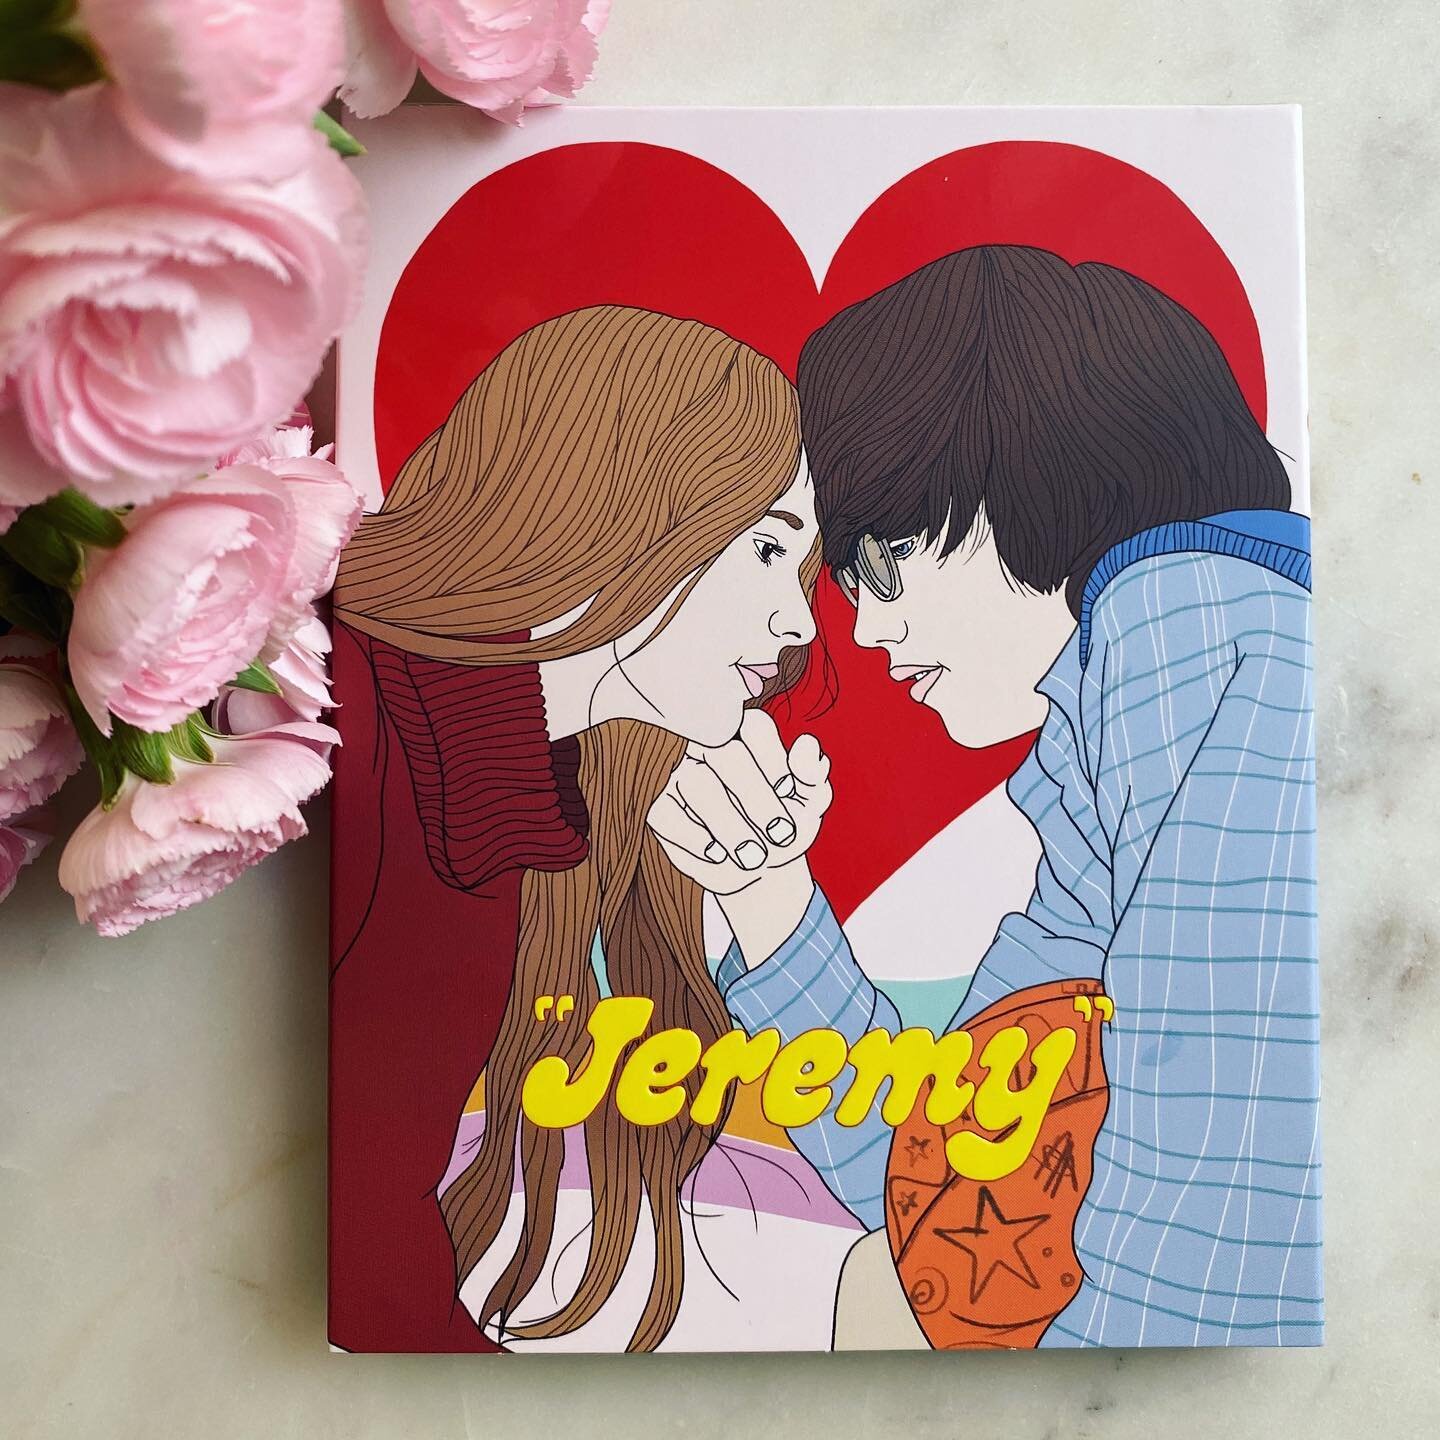 Gasp island! So excited to see how these embossed slip case blue rays came out for the release of the 1973 film &lsquo;Jeremy&rsquo; out on @funcityeditions. A must see chock full of nostalgic NYC youthful ❤️. Includes interviews with stars #robbiebe